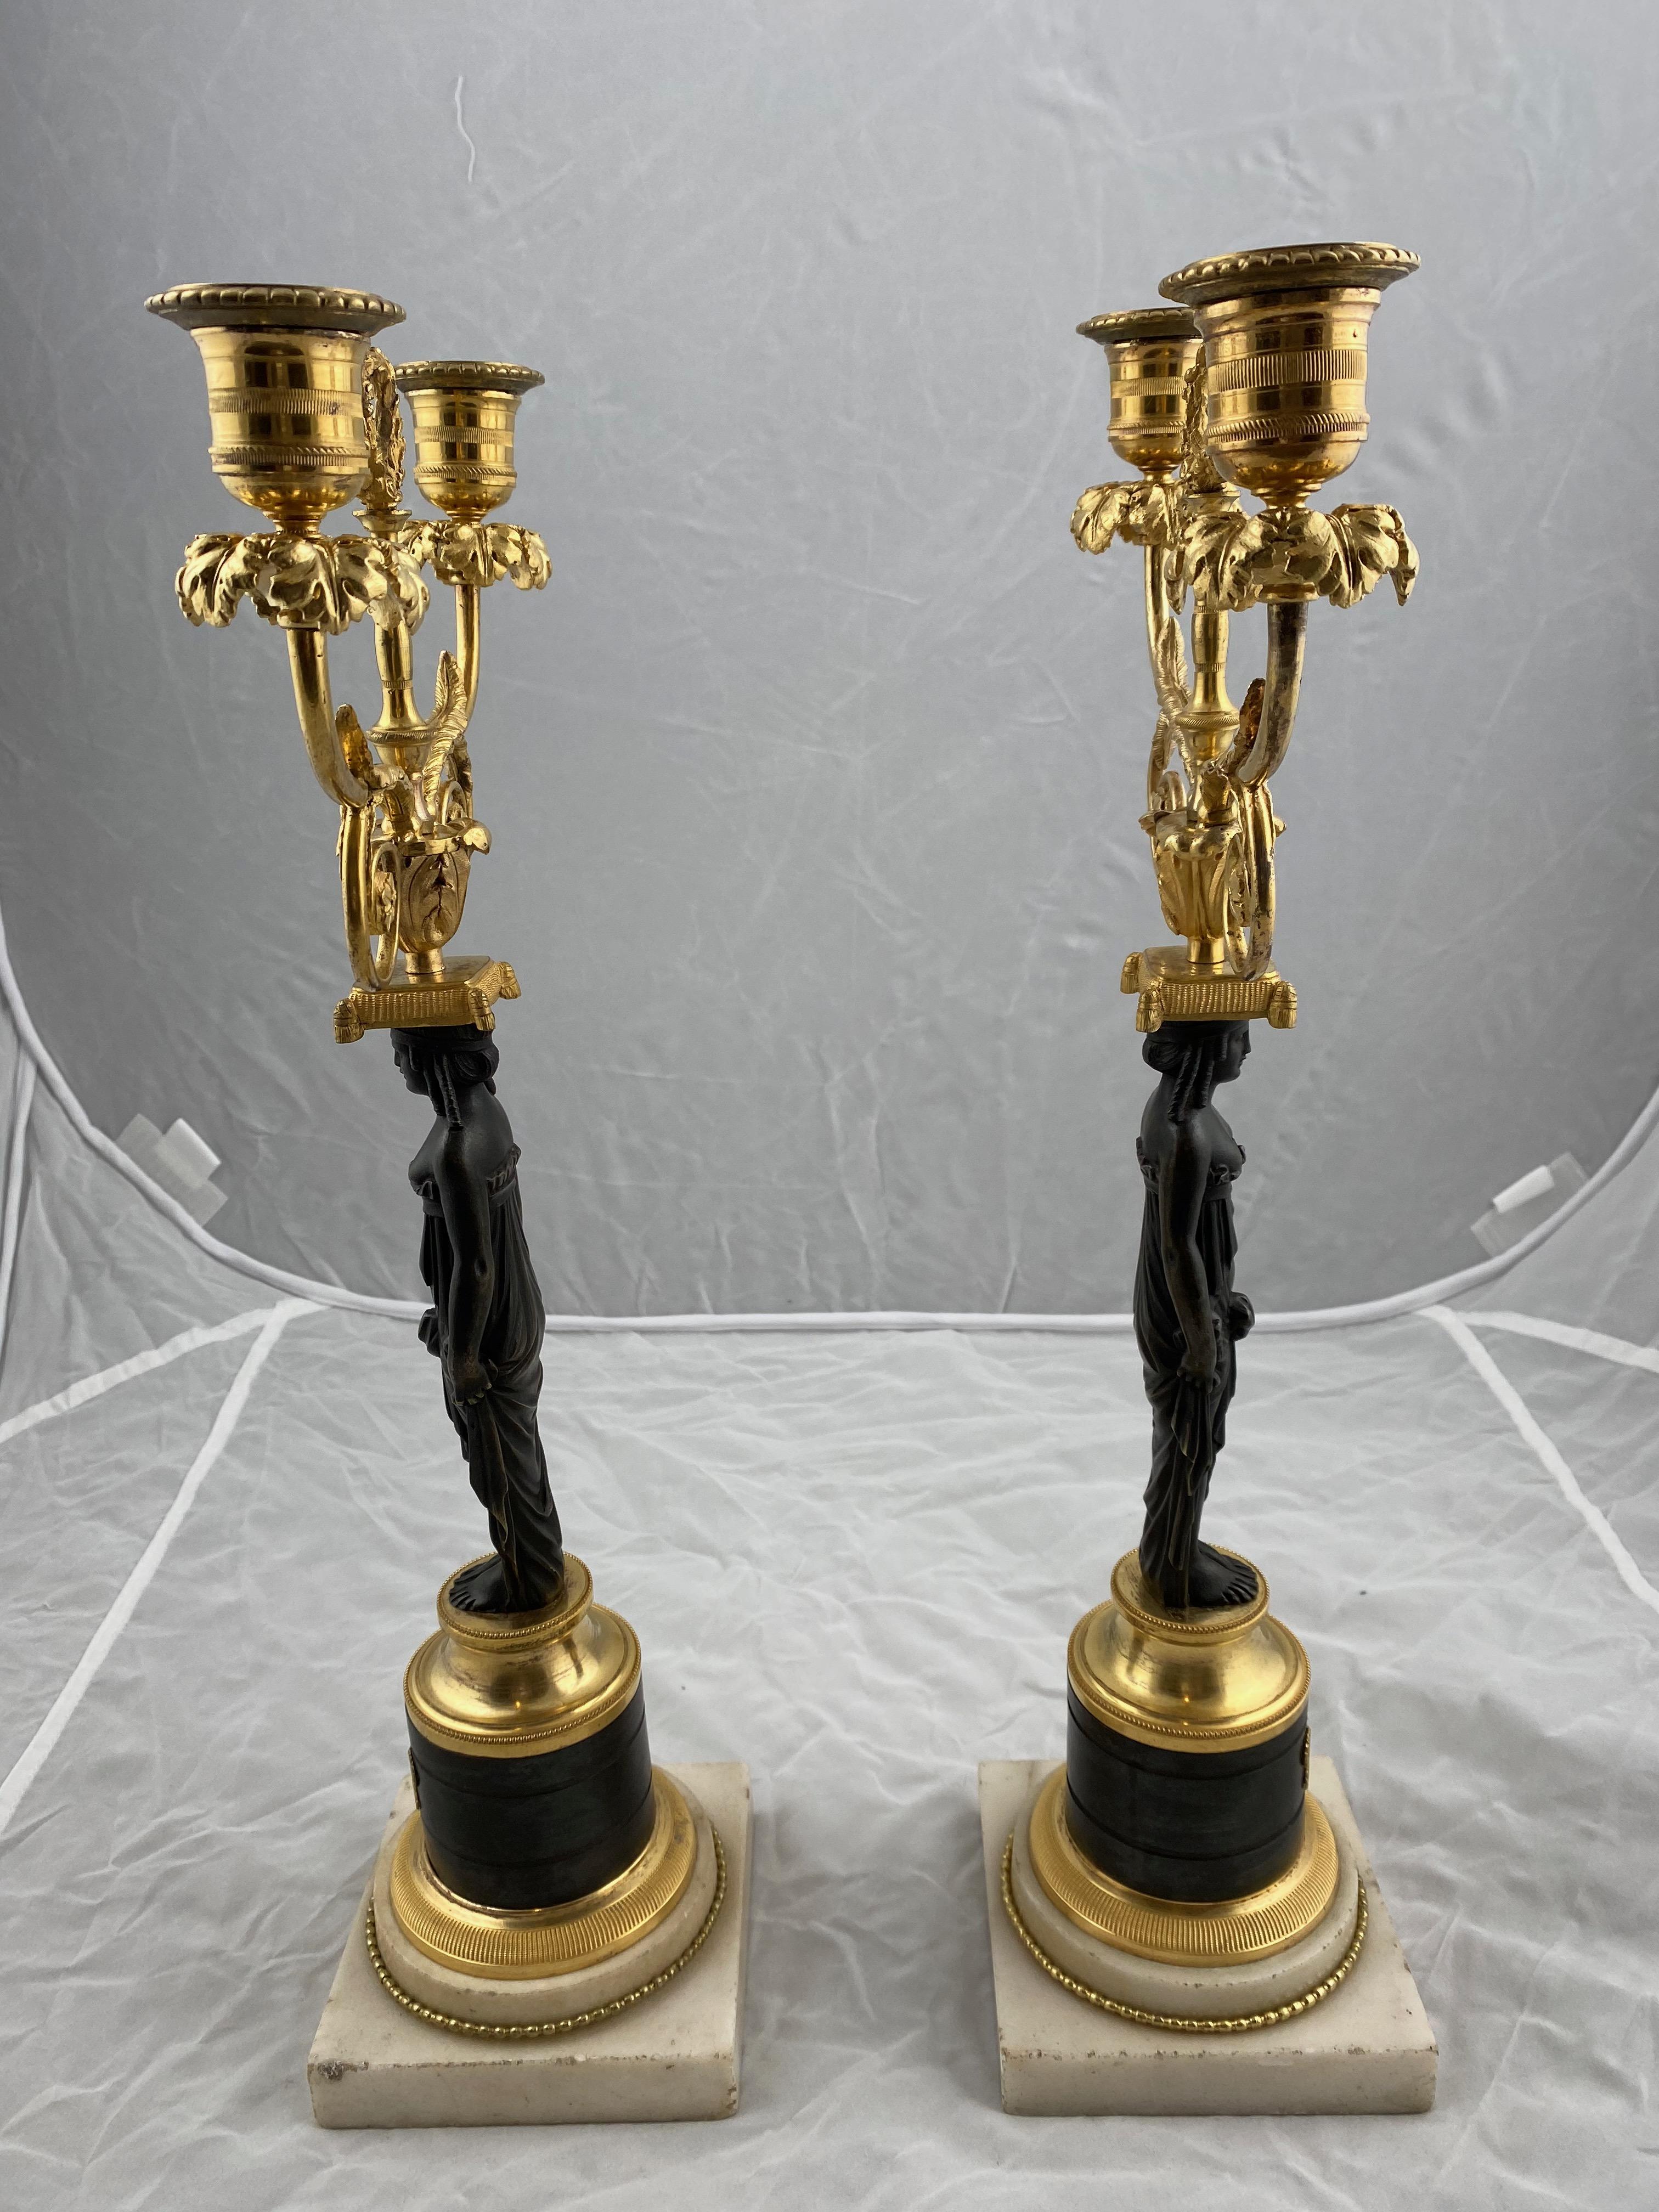 Bronze Pair of Late 18th Century Candelabras